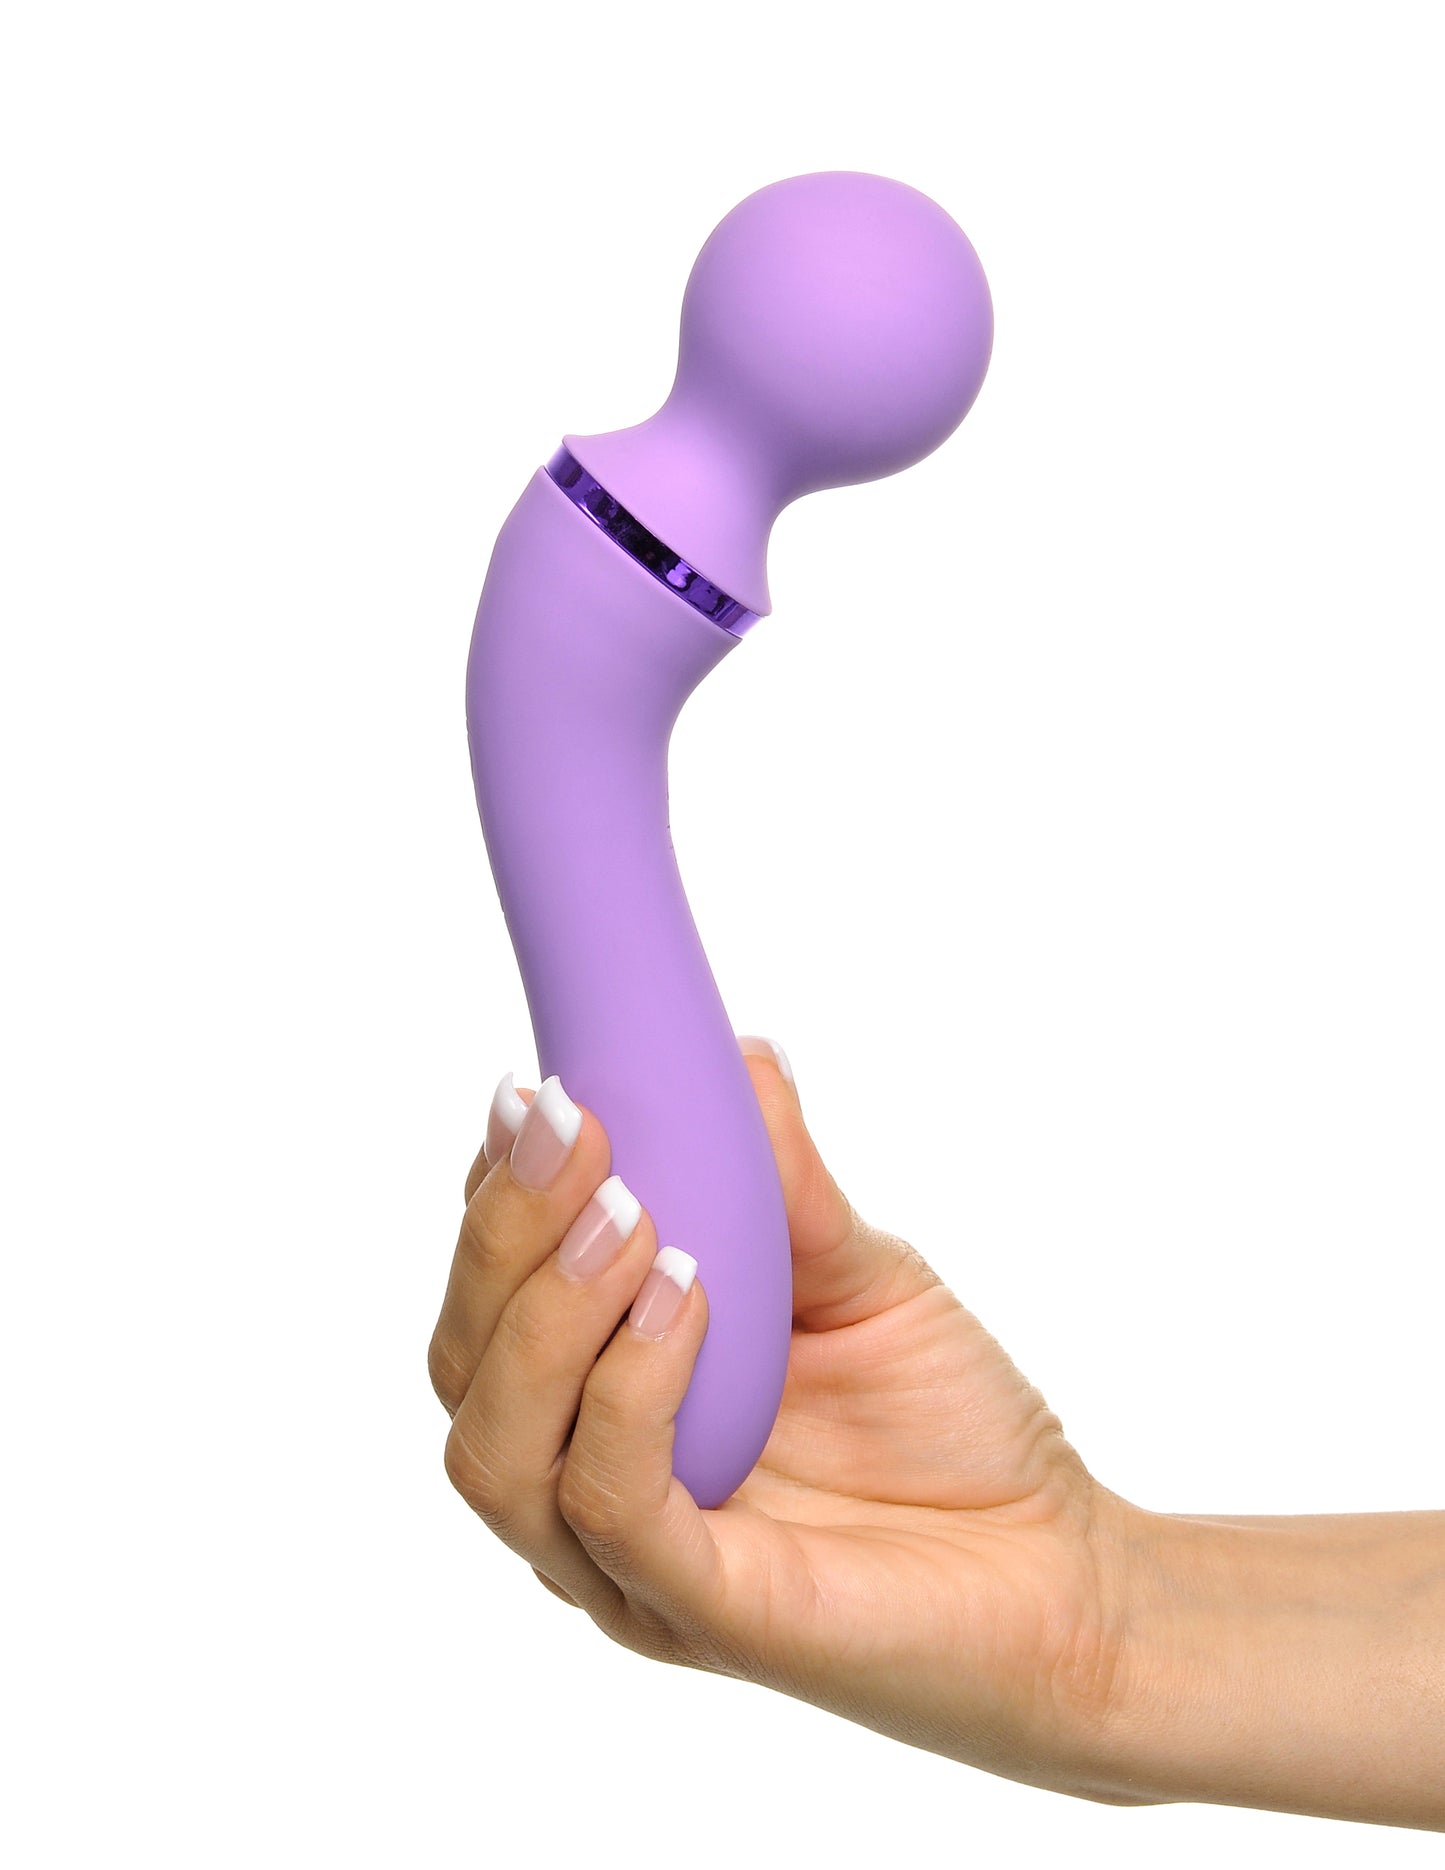 Fantasy for Her Duo Wand Massage-Her